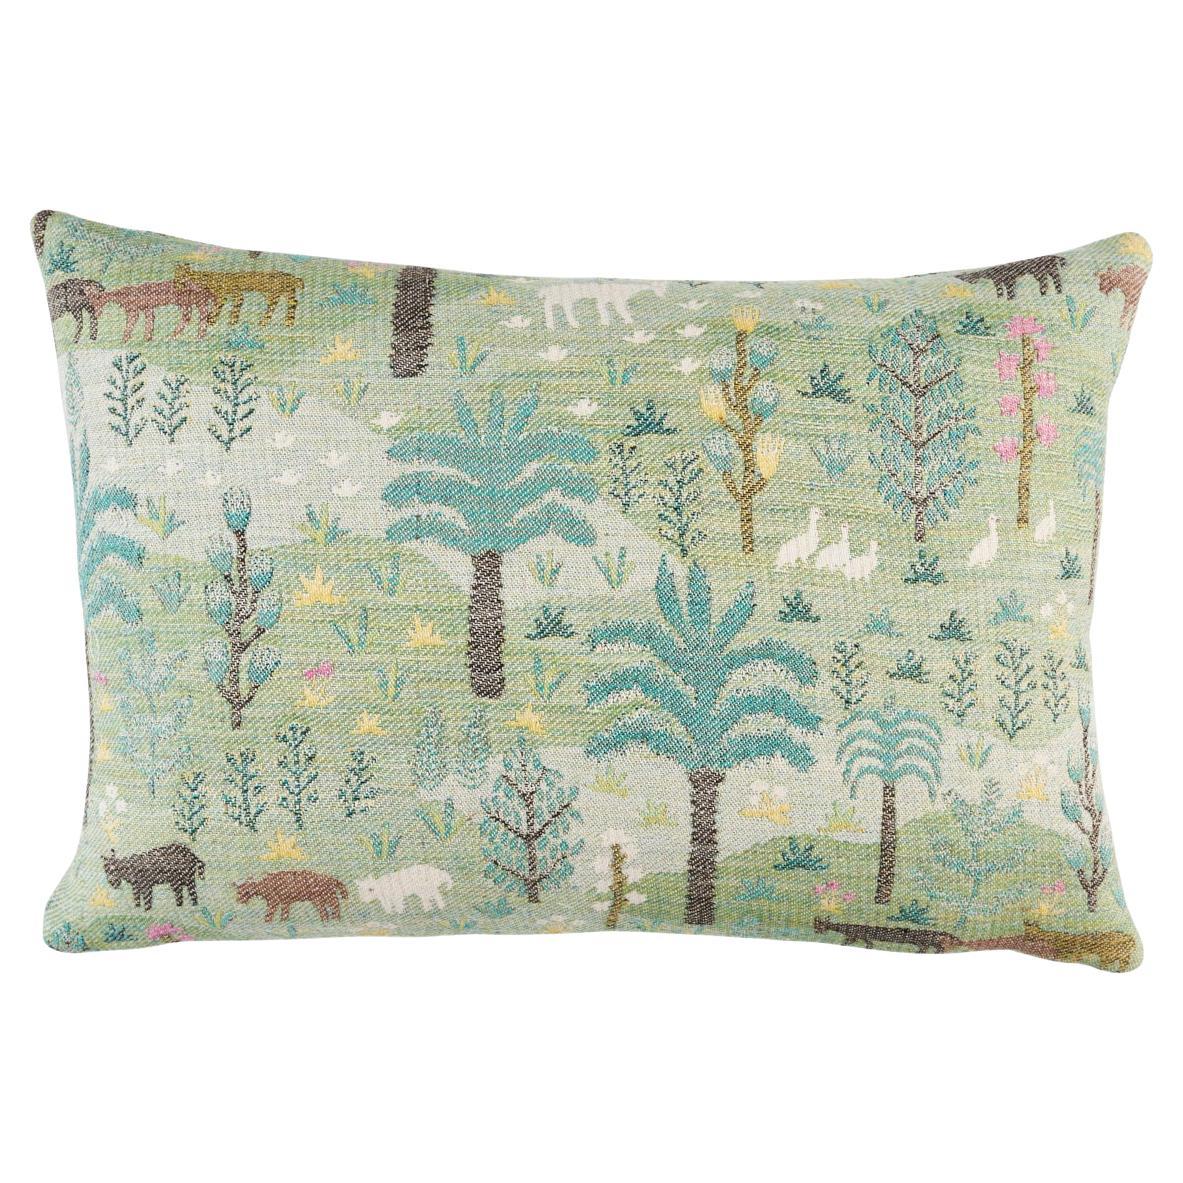 Schumacher Las Colinas Scenic Tapestry Pillow 20x14" in Green For Sale